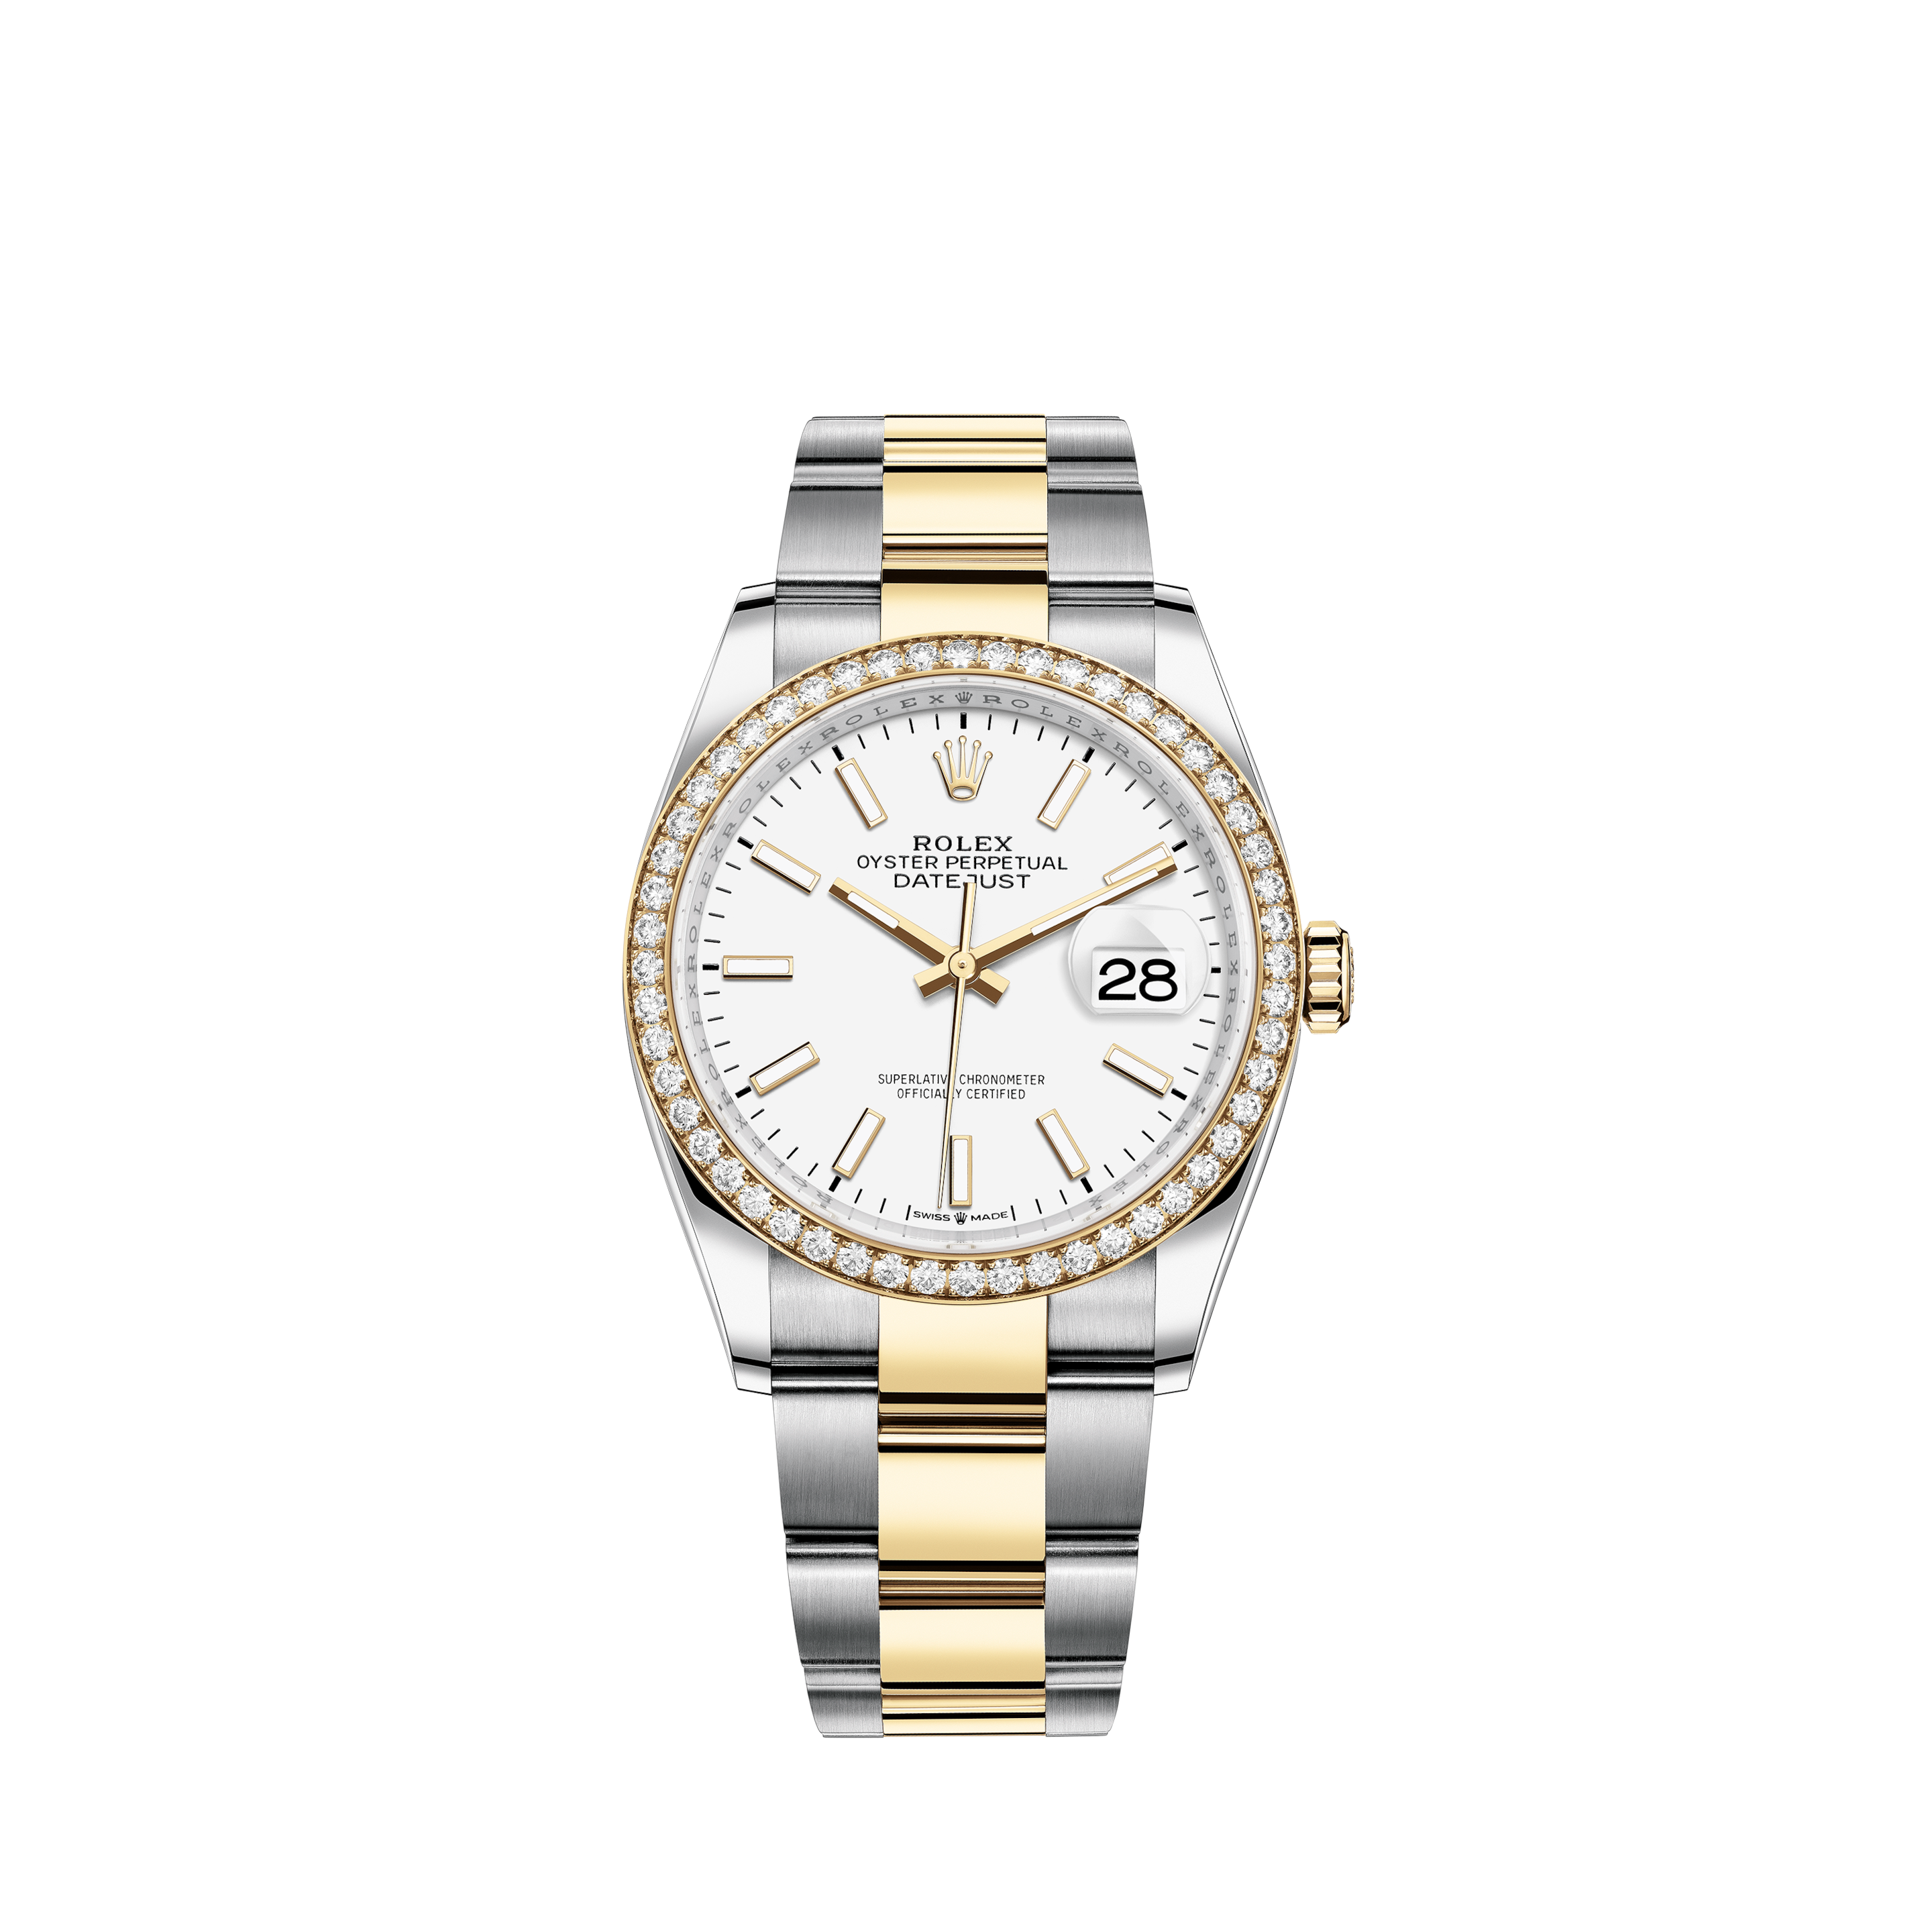 Rolex Oyster Perpetual Datejust 36mm Silver Dial & Diamonds Stainless Steel Automatic Watch